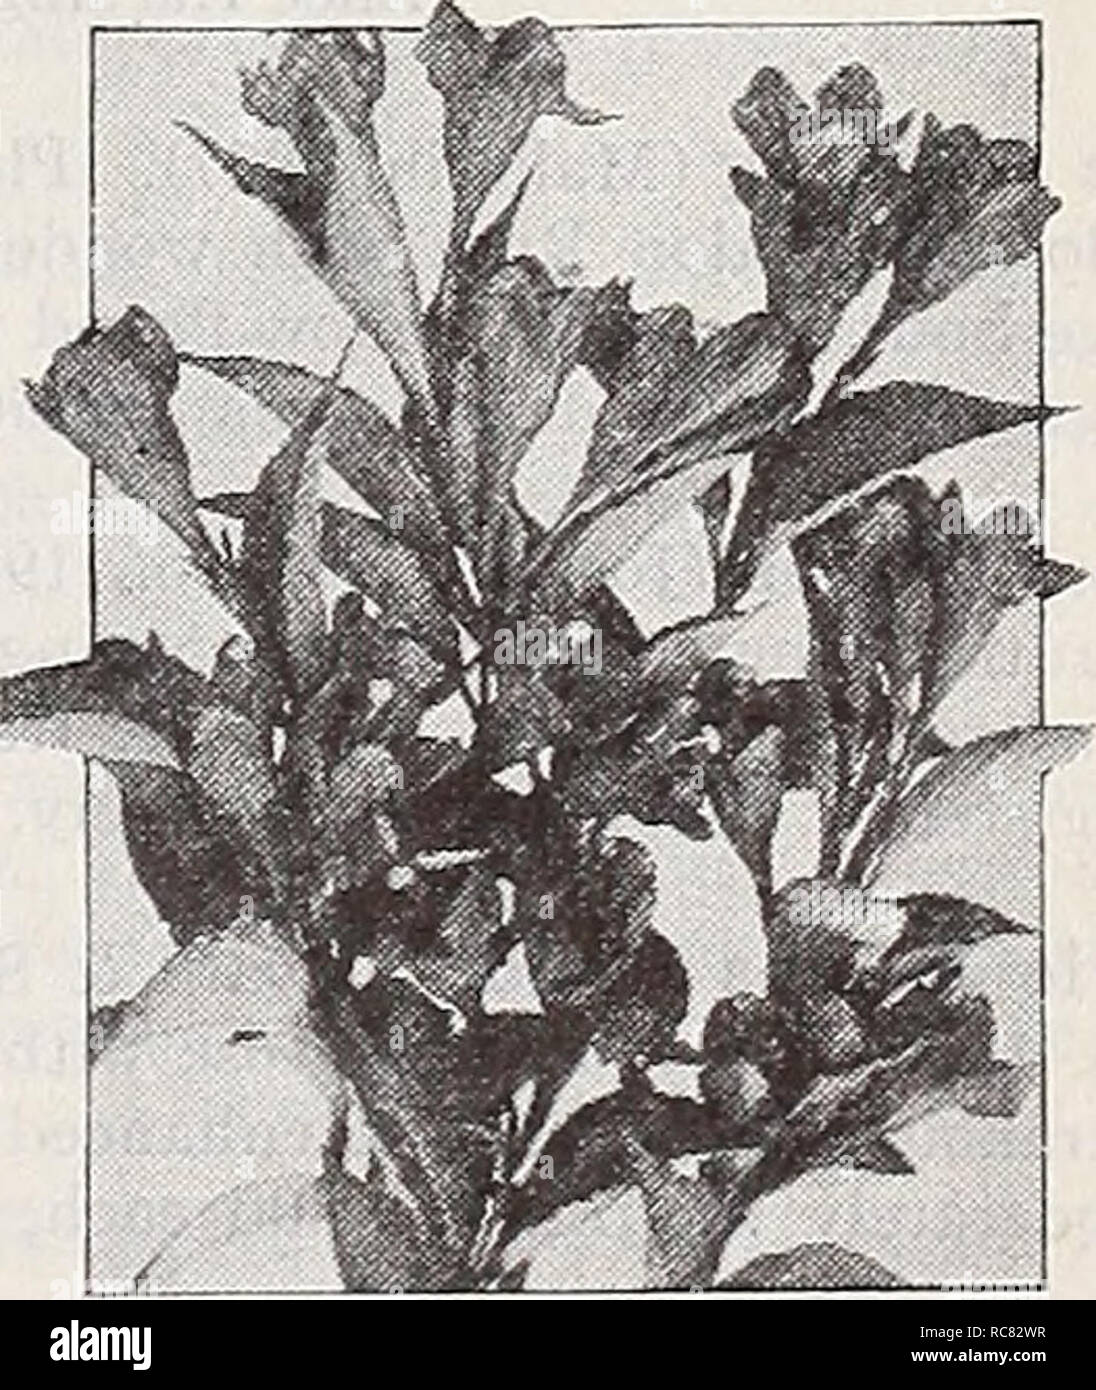 . Dreer's garden book 1939 : 101 years of Dreer quality seeds plants bulbs. Seeds Catalogs; Nursery stock Catalogs; Gardening Equipment and supplies Catalogs; Flowers Seeds Catalogs; Vegetables Seeds Catalogs; Fruit Seeds Catalogs. Vitex macrophylla Witex.—Chaste Tree (T) Macrophylla. A graceful shrub with attractive spikes of lovely lavender-blue flowers. Blooms profusely from July until fall and grows more than 10 feet high unless pruned back. It is a most desirable summer-flowering shrub of distinctive appearance. Strong plants, size 15-18 in., 75c each; $7.50 per doz.. Weigela Eva Rathke W Stock Photo